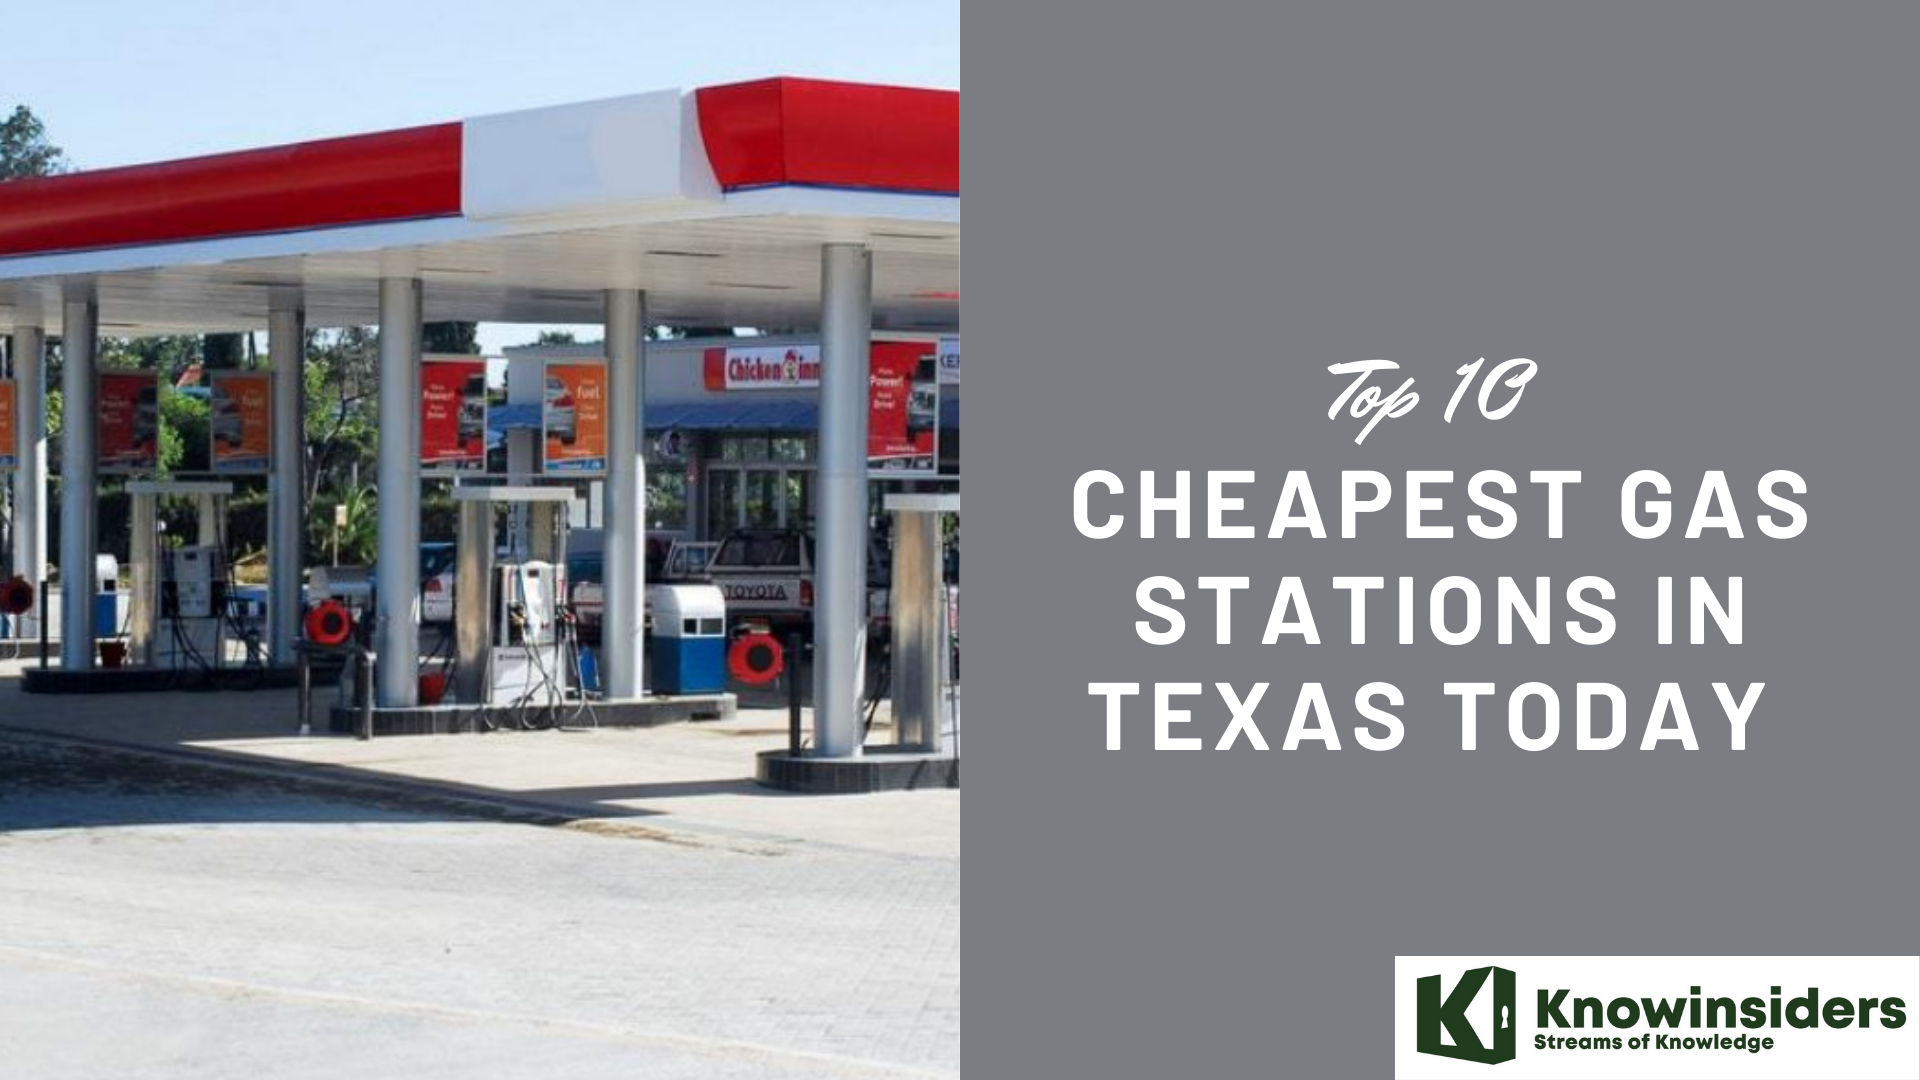 Top 10 Cheapest Gas Stations In Texas That You Keep in Mind